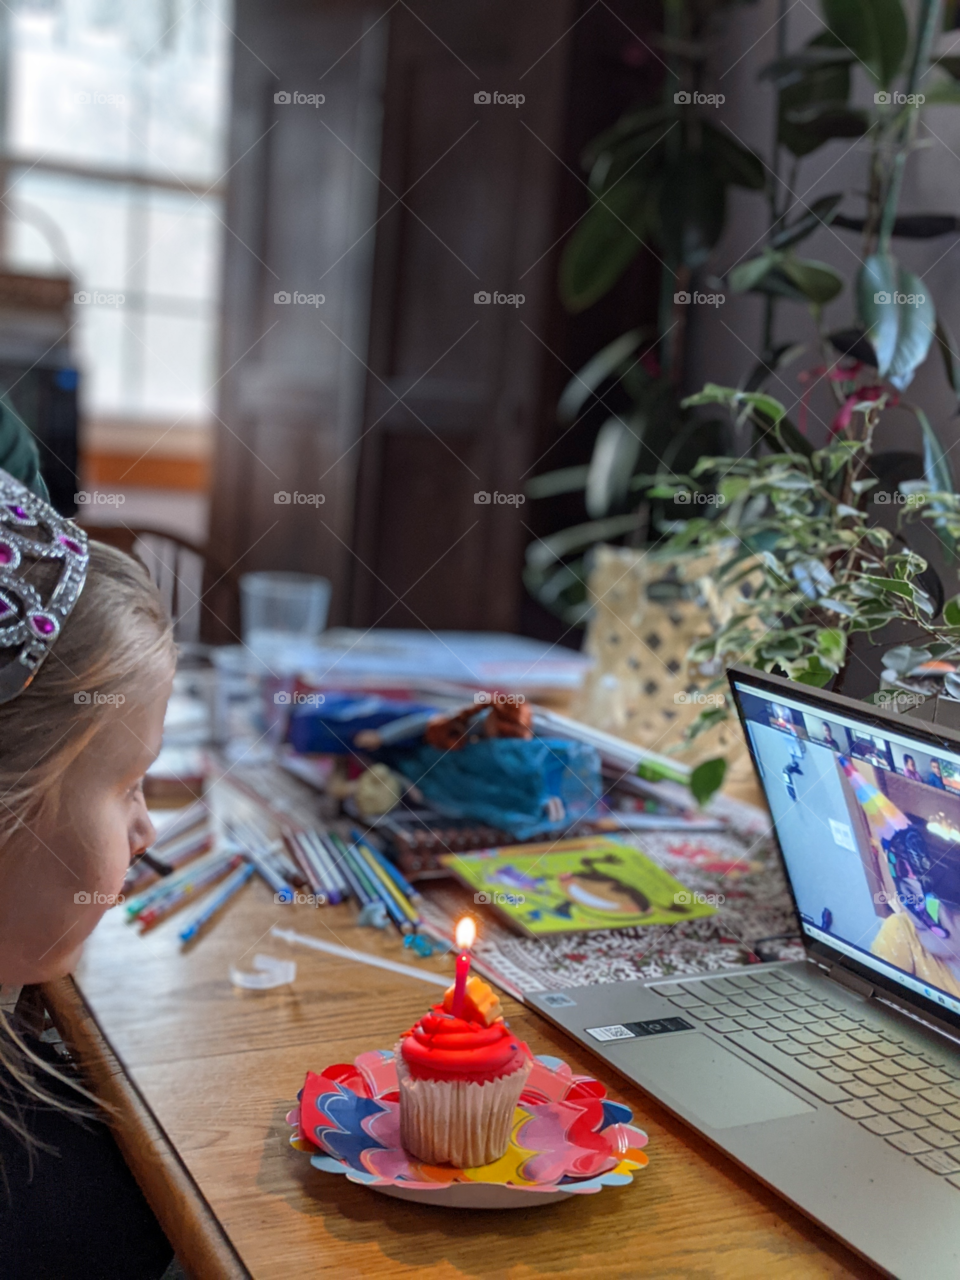 virtual child's birthday party in 2020